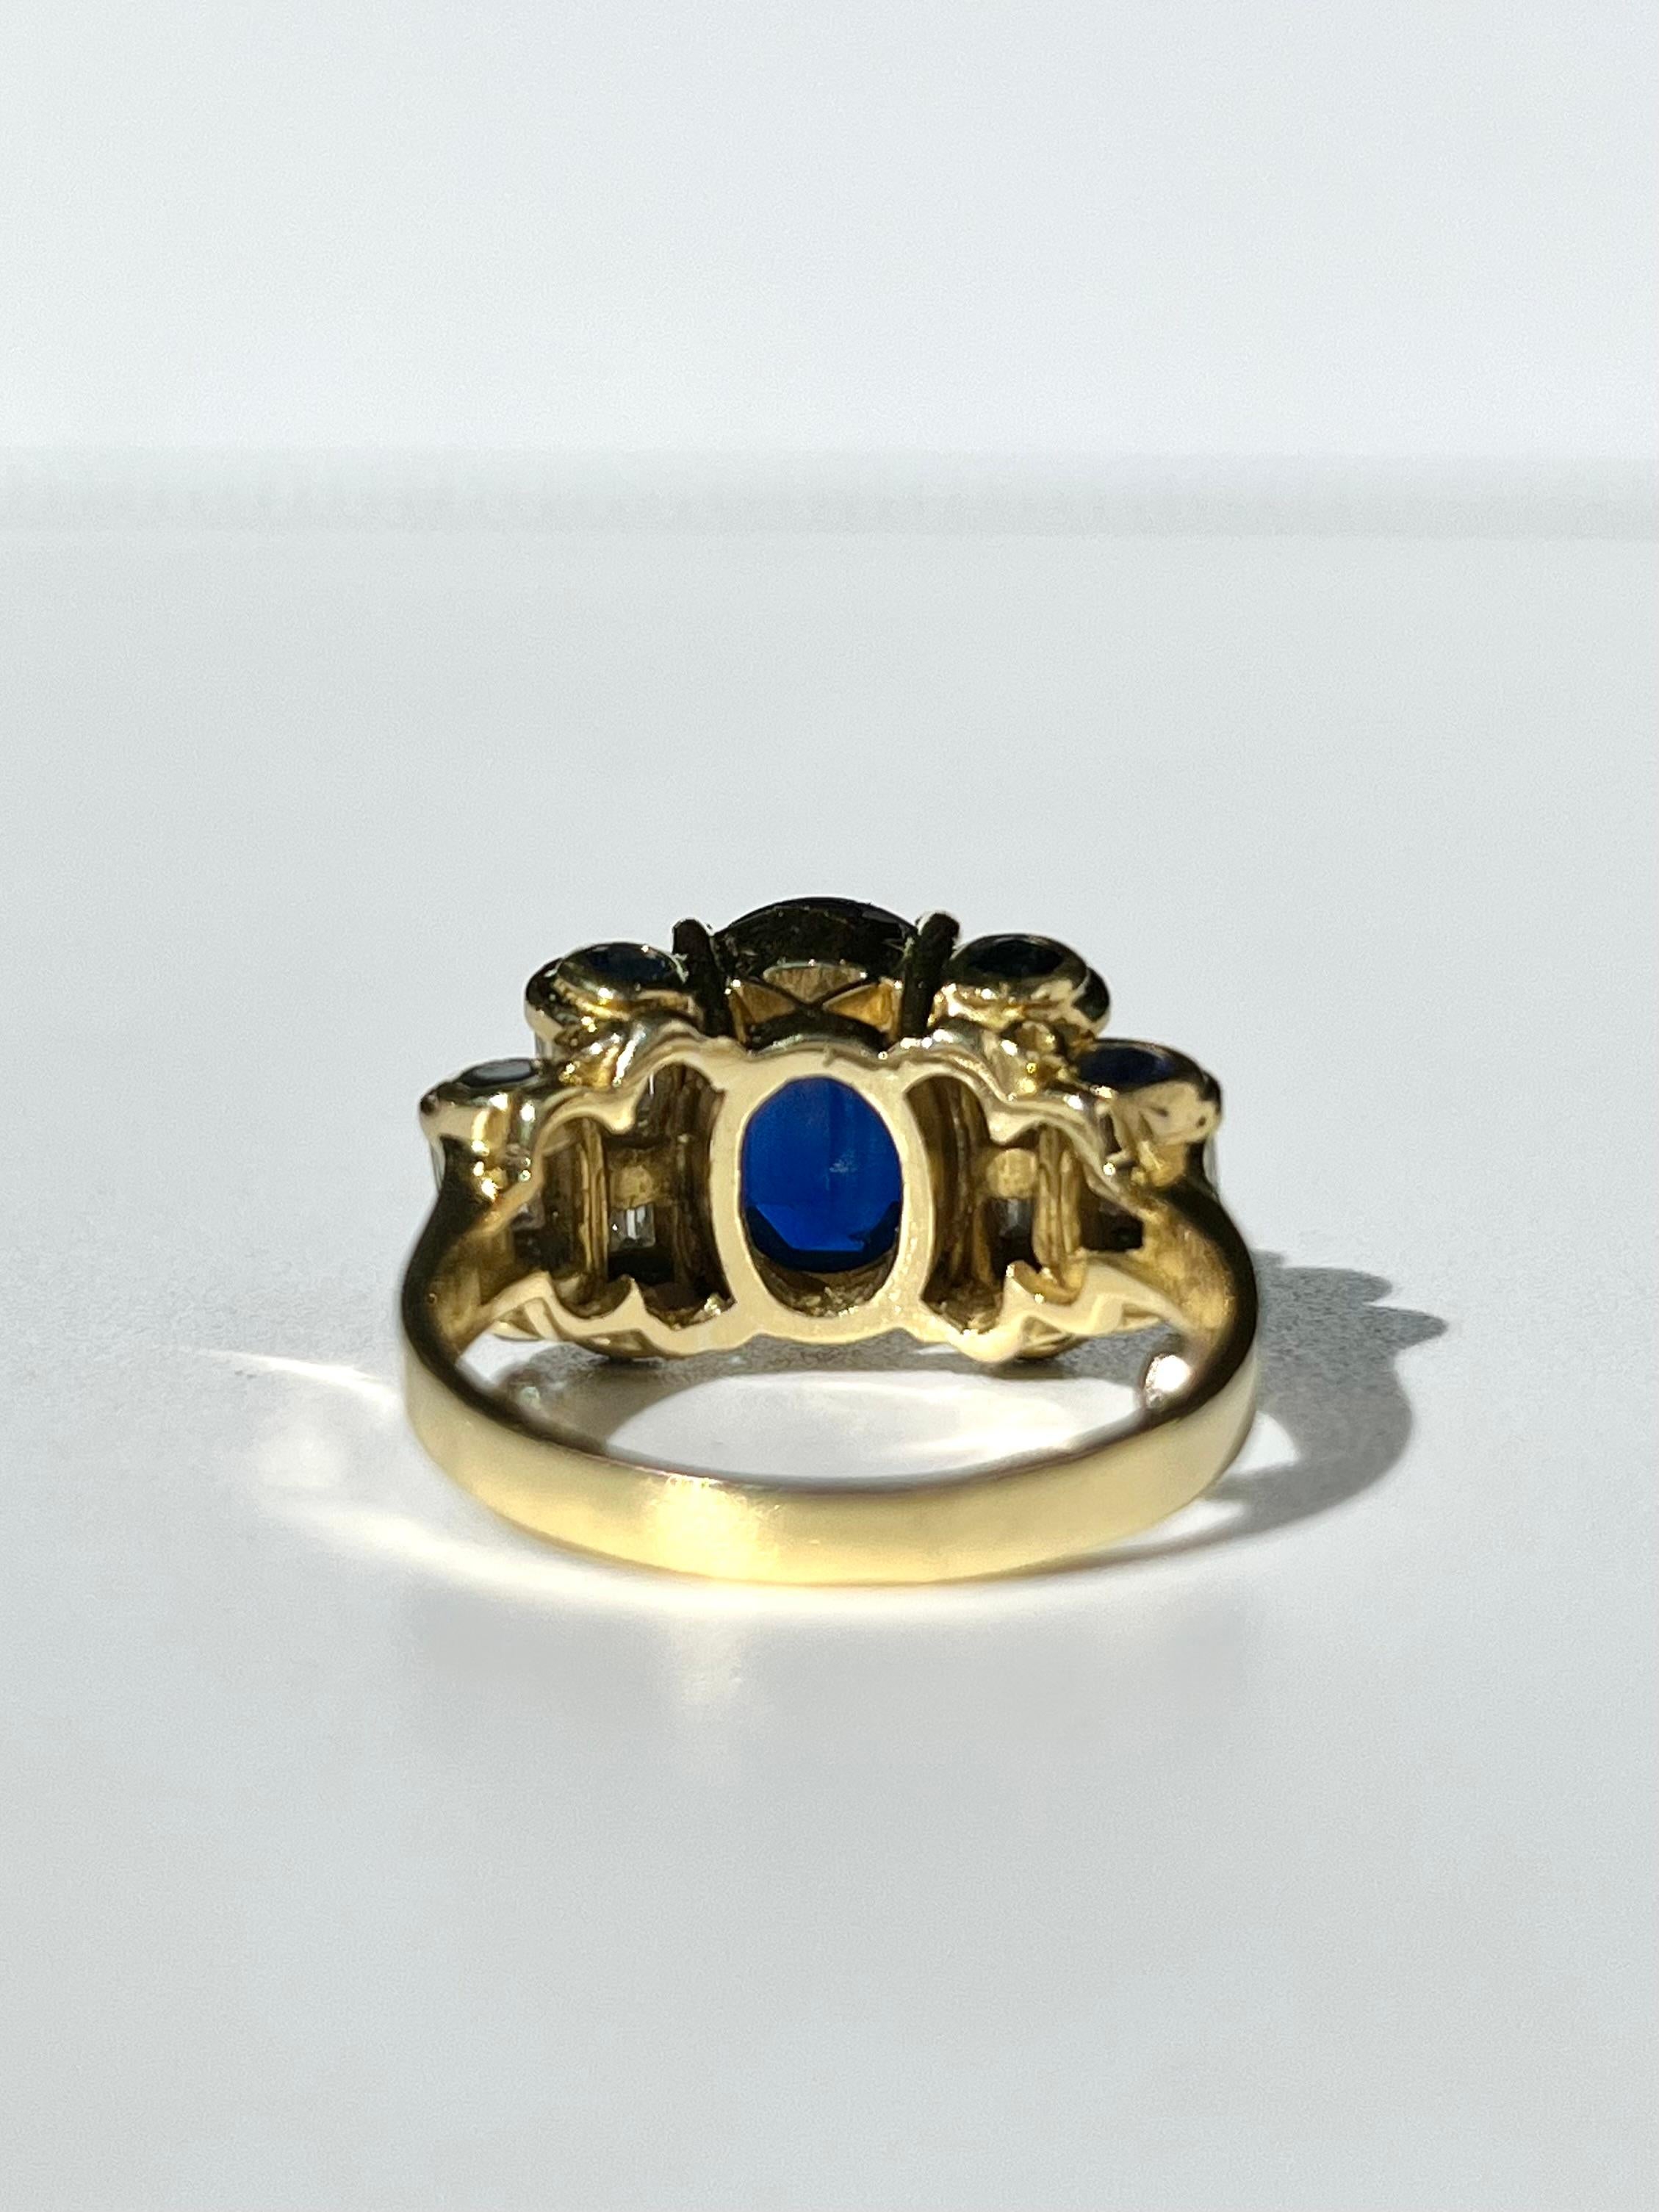 Women's Vintage 4.50 Carat Chanthaburi Sapphire and Baguette Diamond Ring in 18k Gold For Sale